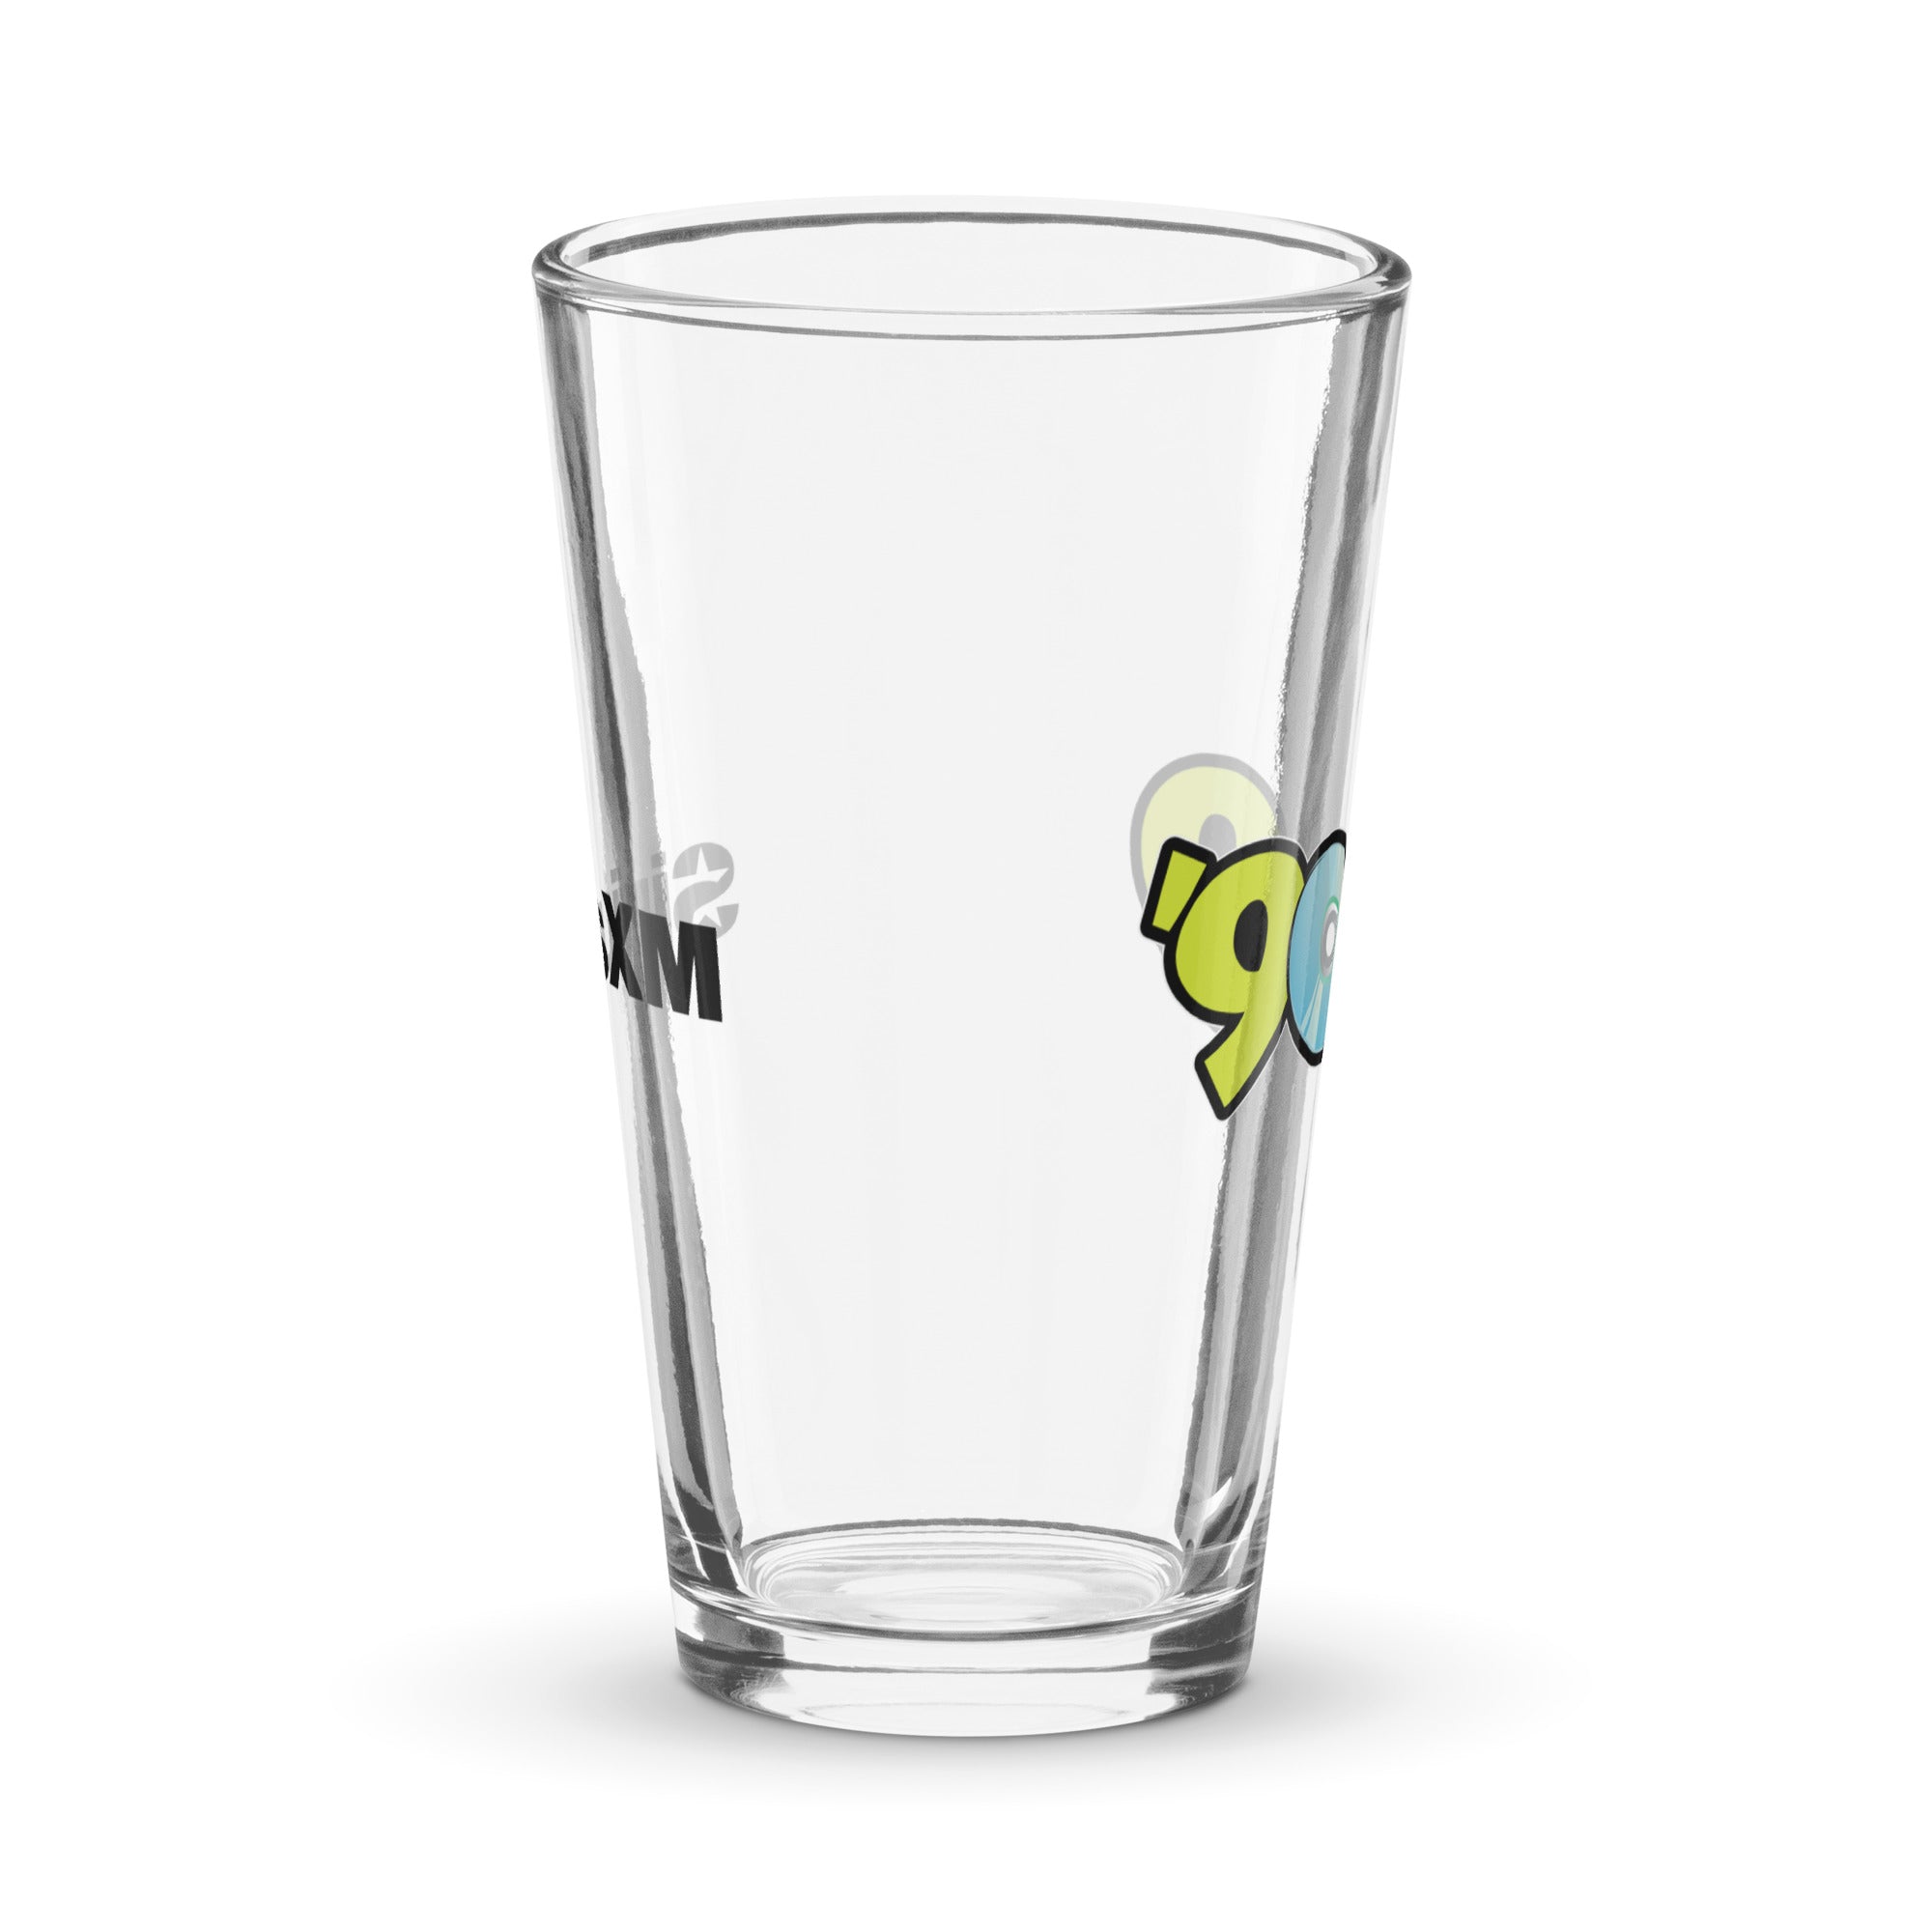 90s on 9: Pint Glass